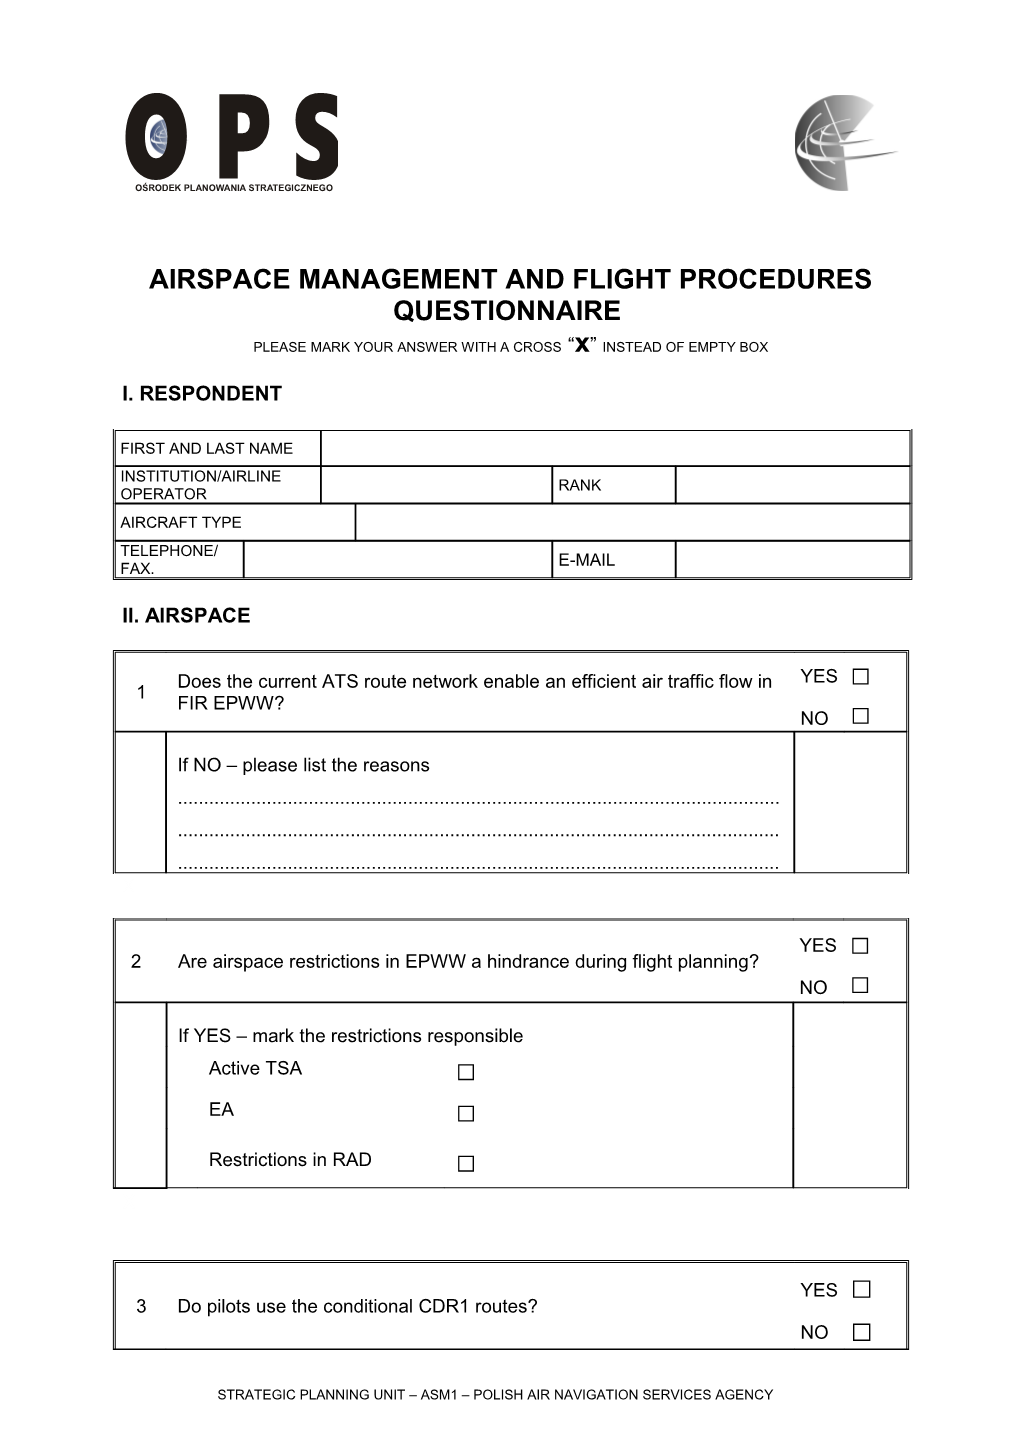 Airspace Management and Flight Procedures Questionnaire